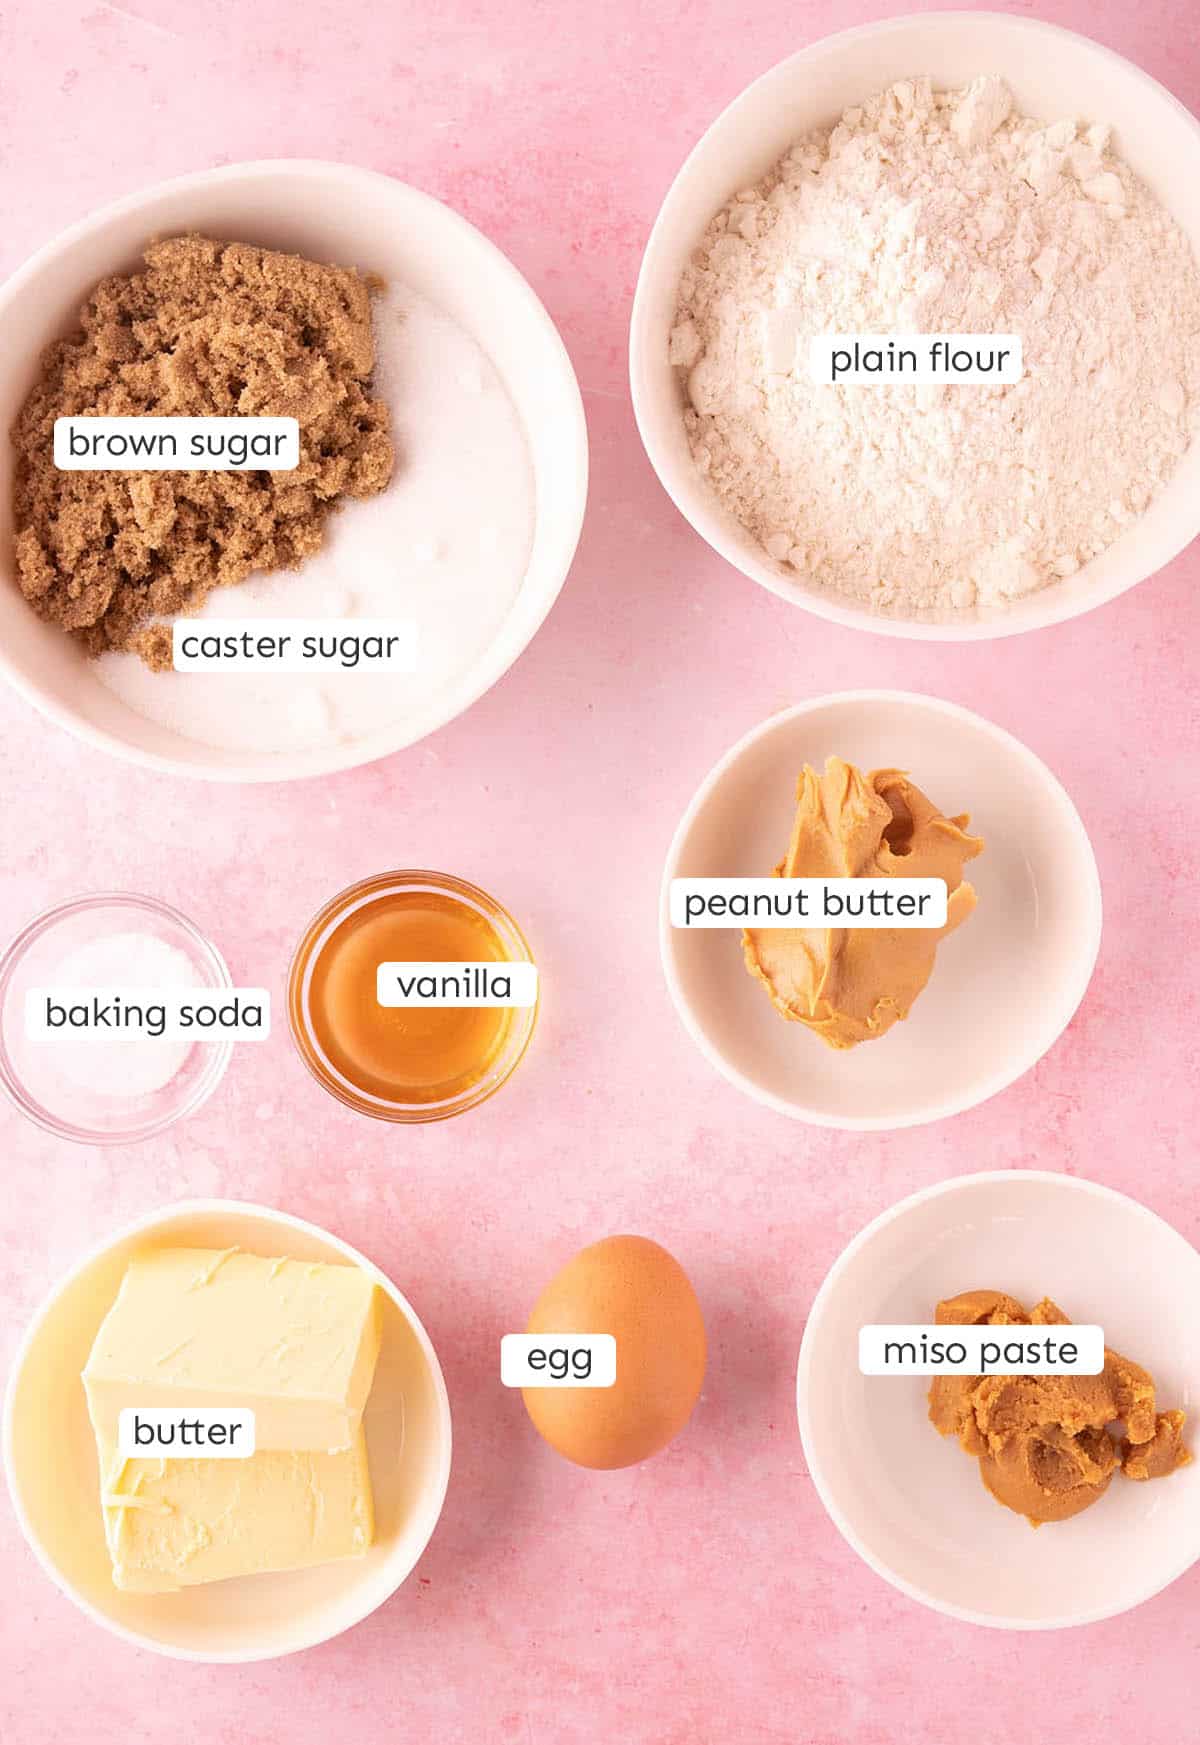 All the ingredients needed to make Peanut Butter Miso Cookies from scratch on a pink background.